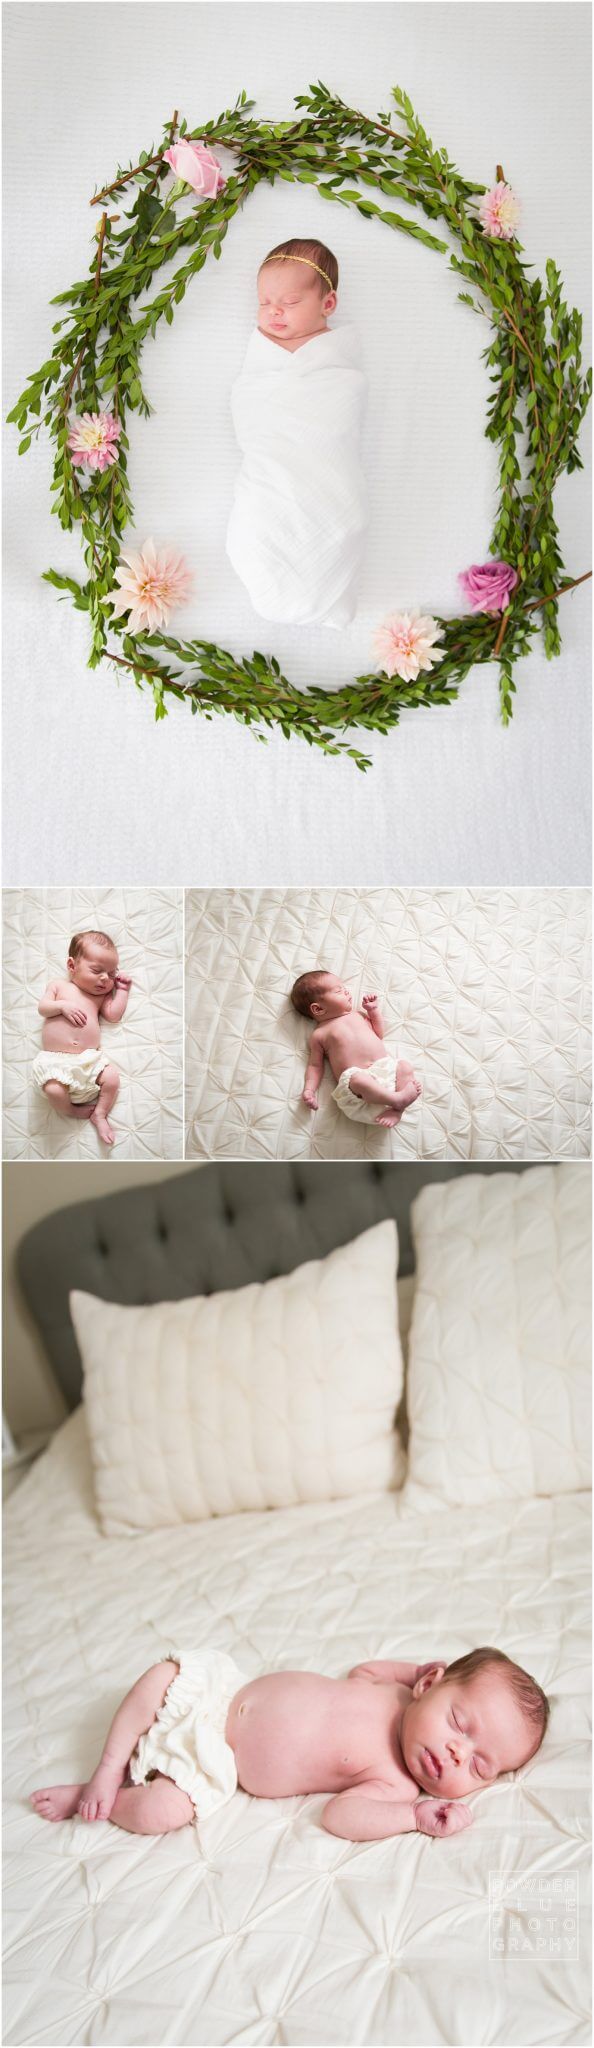 pittsburgh lifestyle newborn photography session in home baby girl roses pink and grey nursery